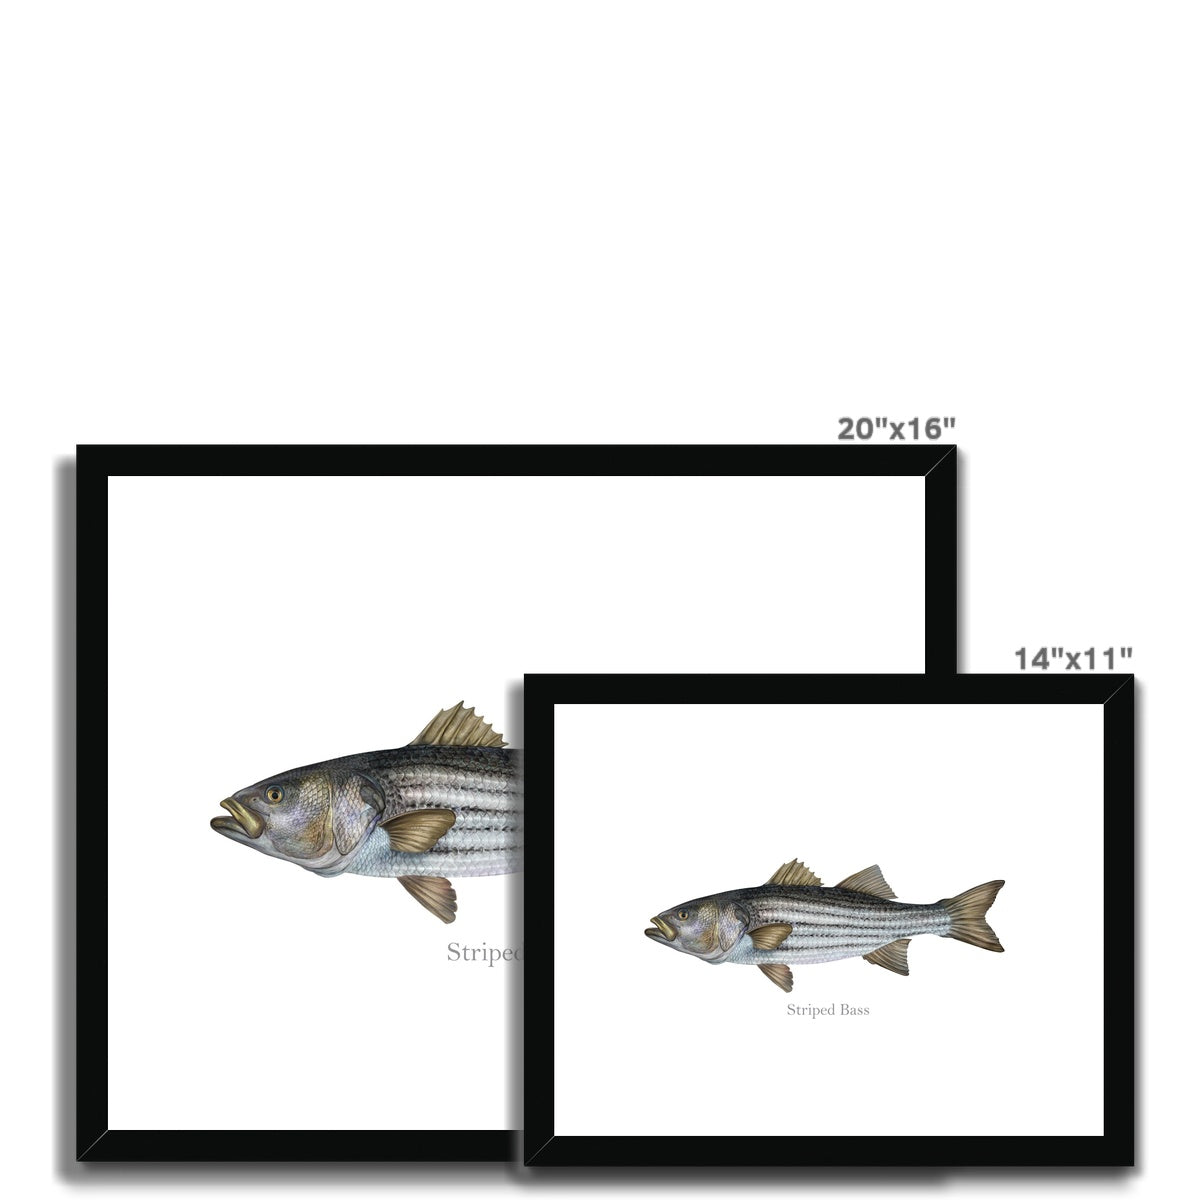 Striped Bass - Framed & Mounted Print